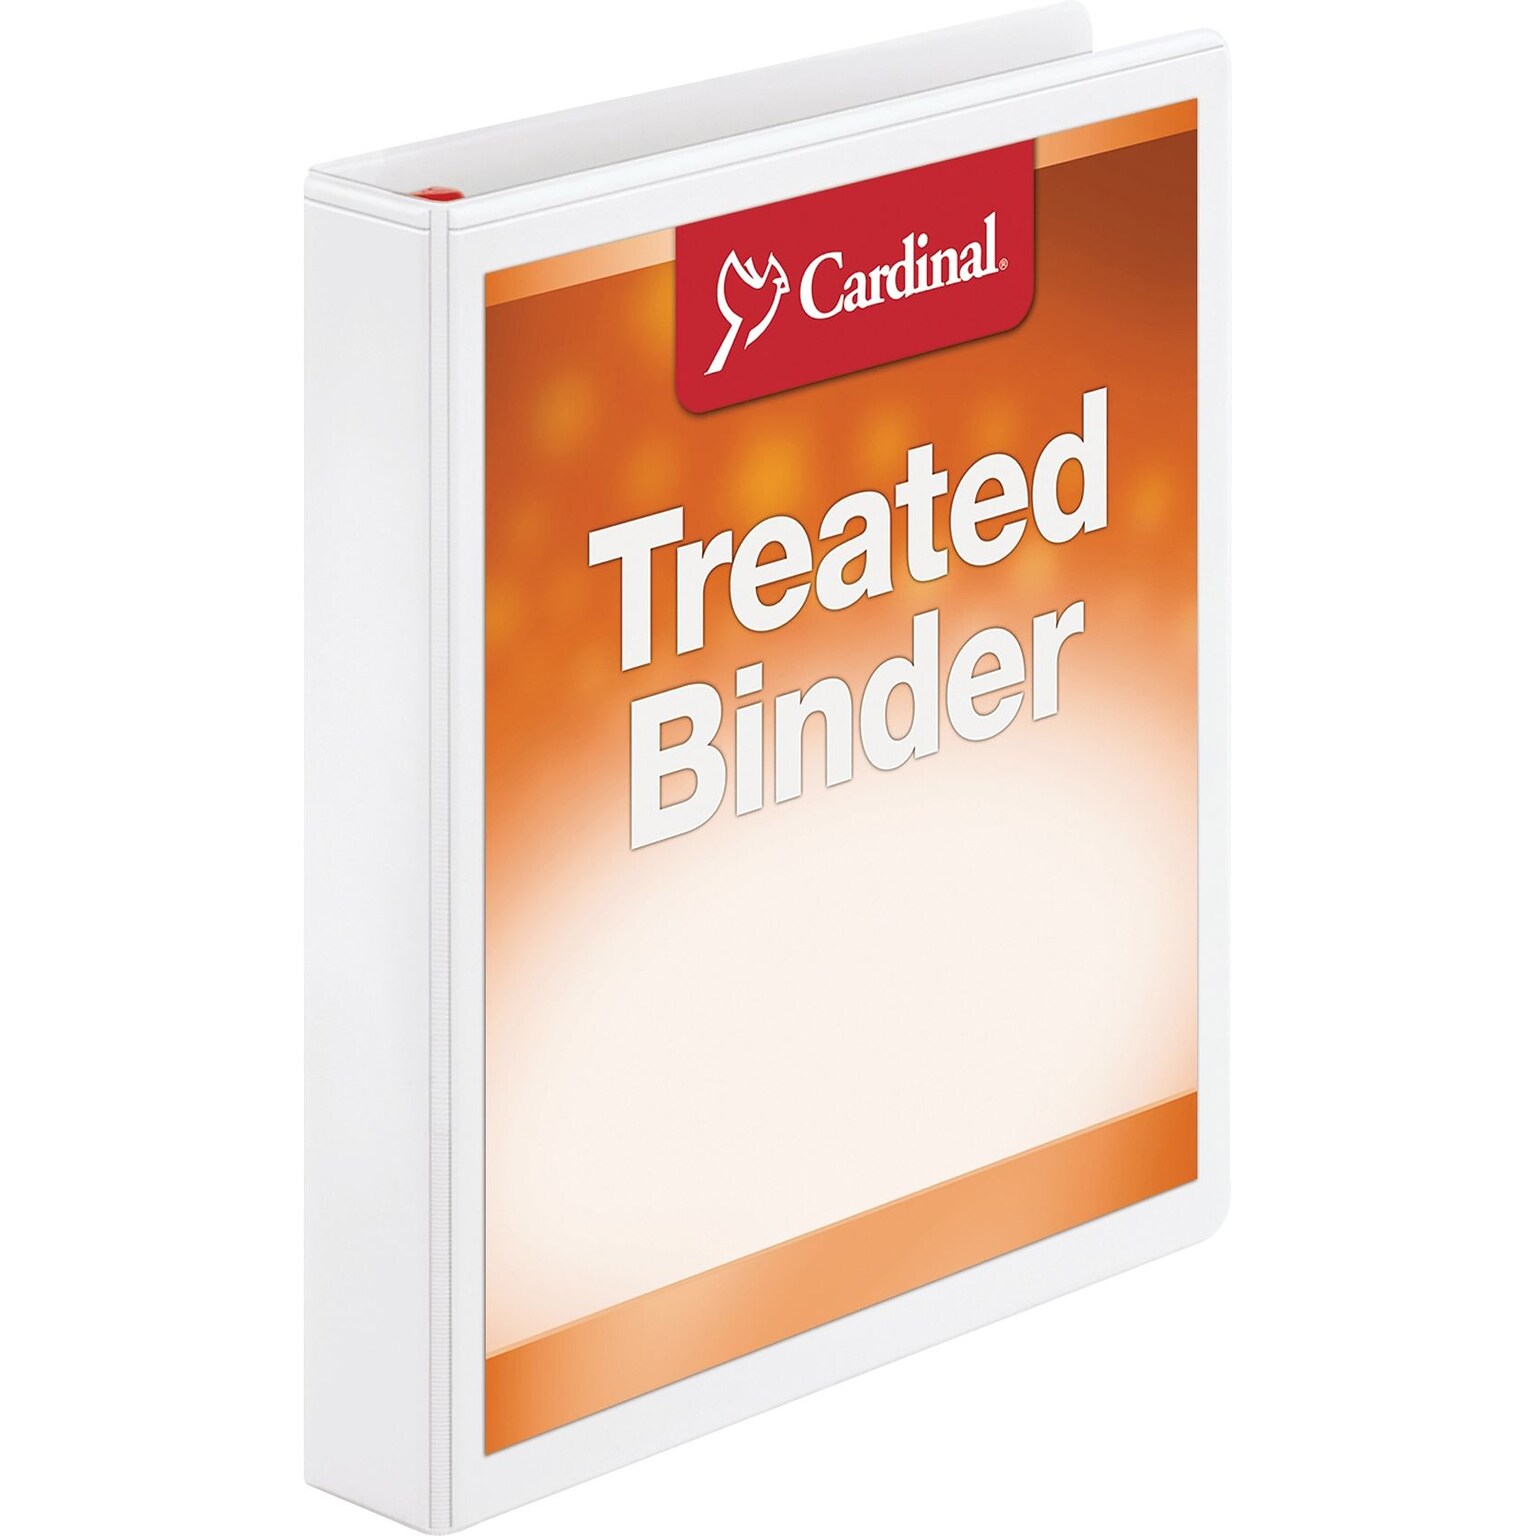 Cardinal ClearVue 1 3-Ring View Binders, D-Ring, White (32100)